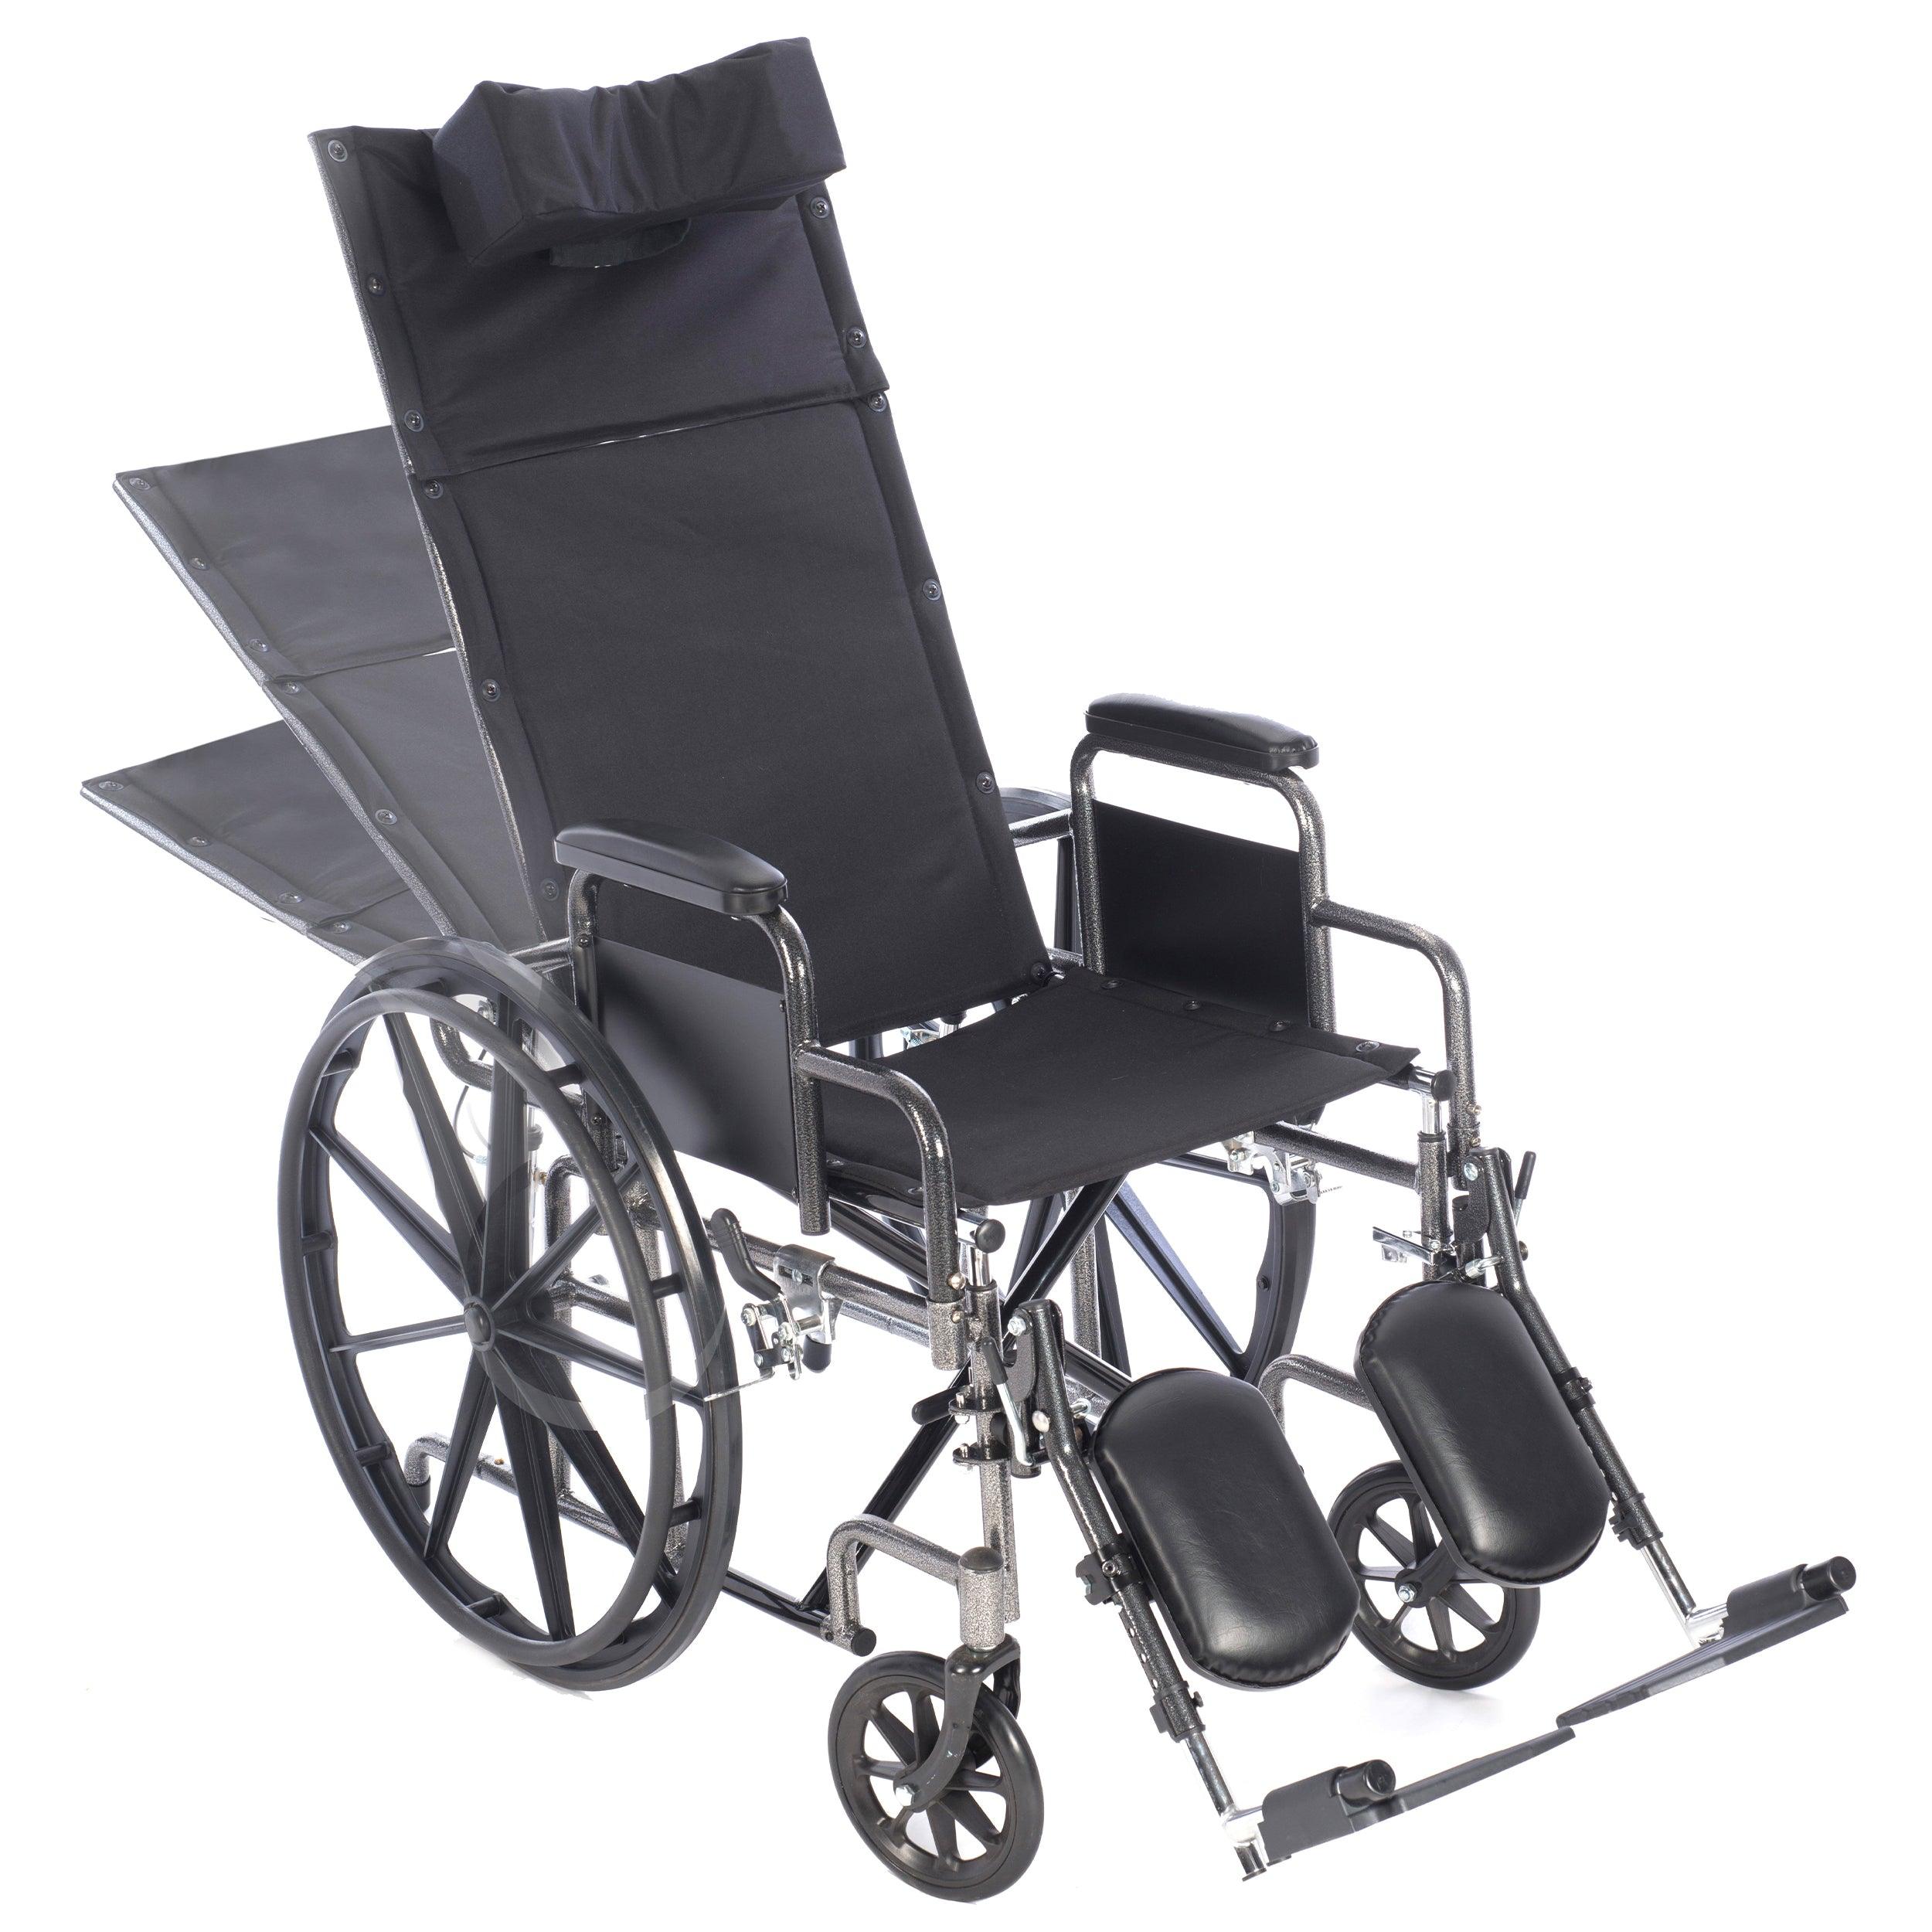 ProHeal Ultra Wide Bariatric Wheelchair, 22 Wide Seat, Desk